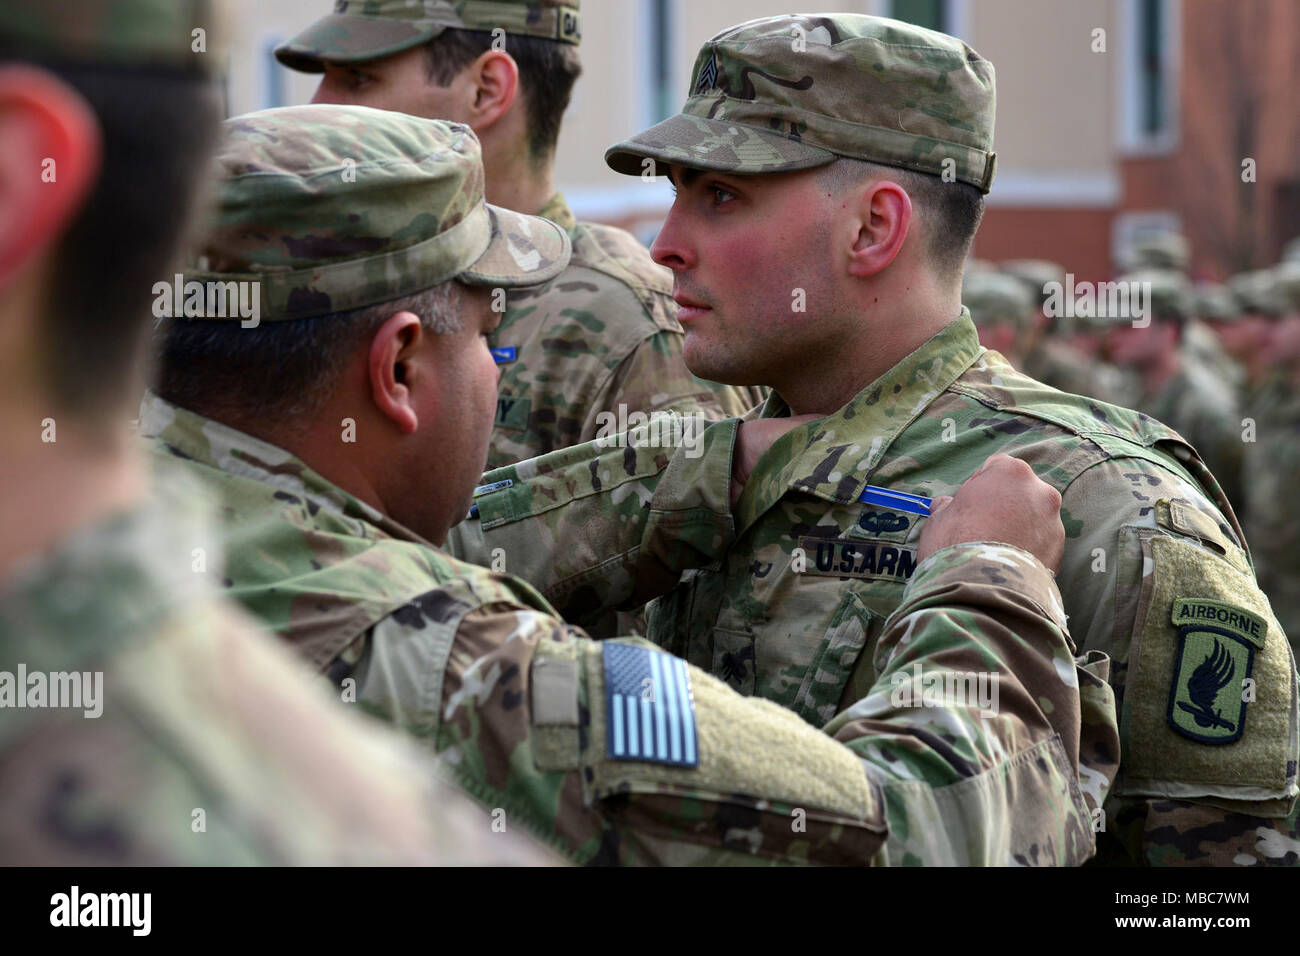 A U.S. Army Paratrooper assigned to the 173rd Airborne Brigade pins the Expert Infantryman Badge (EIB) on a fellow Paratrooper, during the EIB ceremony at Caserma Del Din, Vicenza, Italy, 15 Feb. 2018. (U.S. Army Stock Photo